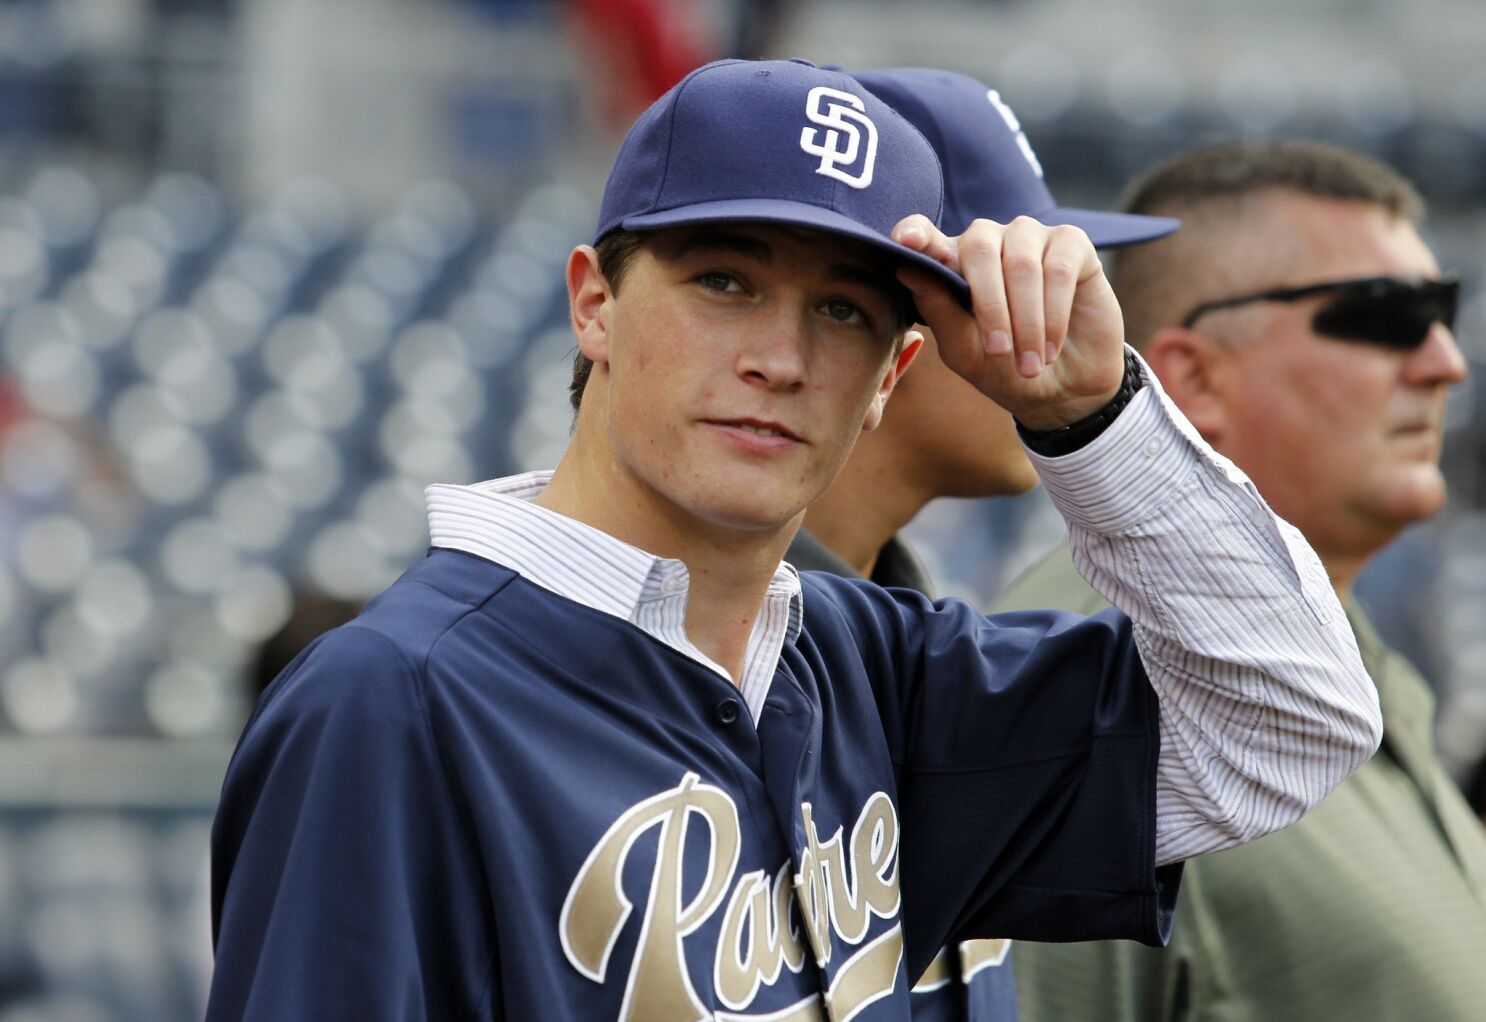 Why the Padres need a top-10 draft pick - The San Diego Union-Tribune